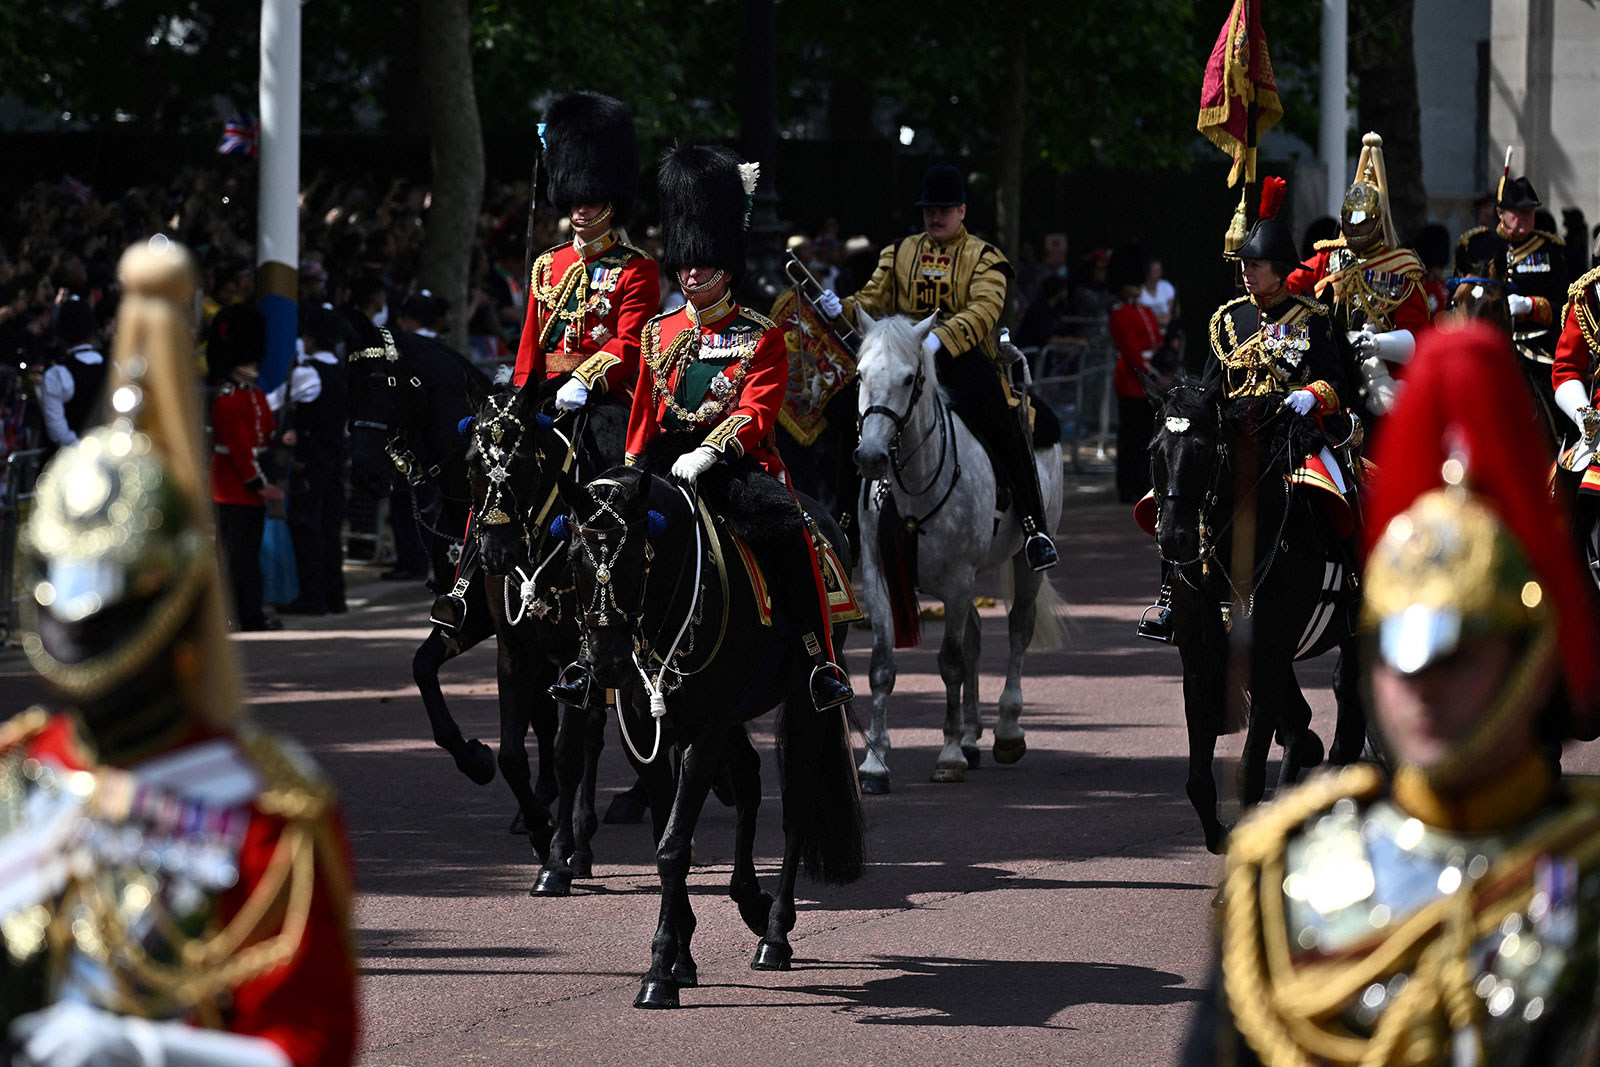 Britain's Prince Charles, center, in his role as Colonel of the Welsh Guards, Britain's Prince William, left, in his role as Colonel of the Irish Guards, and Britain's Princess Anne, right, in her role as Colonel of the Blues and Royals, ride their horses along The Mall during the Trooping the Colour.